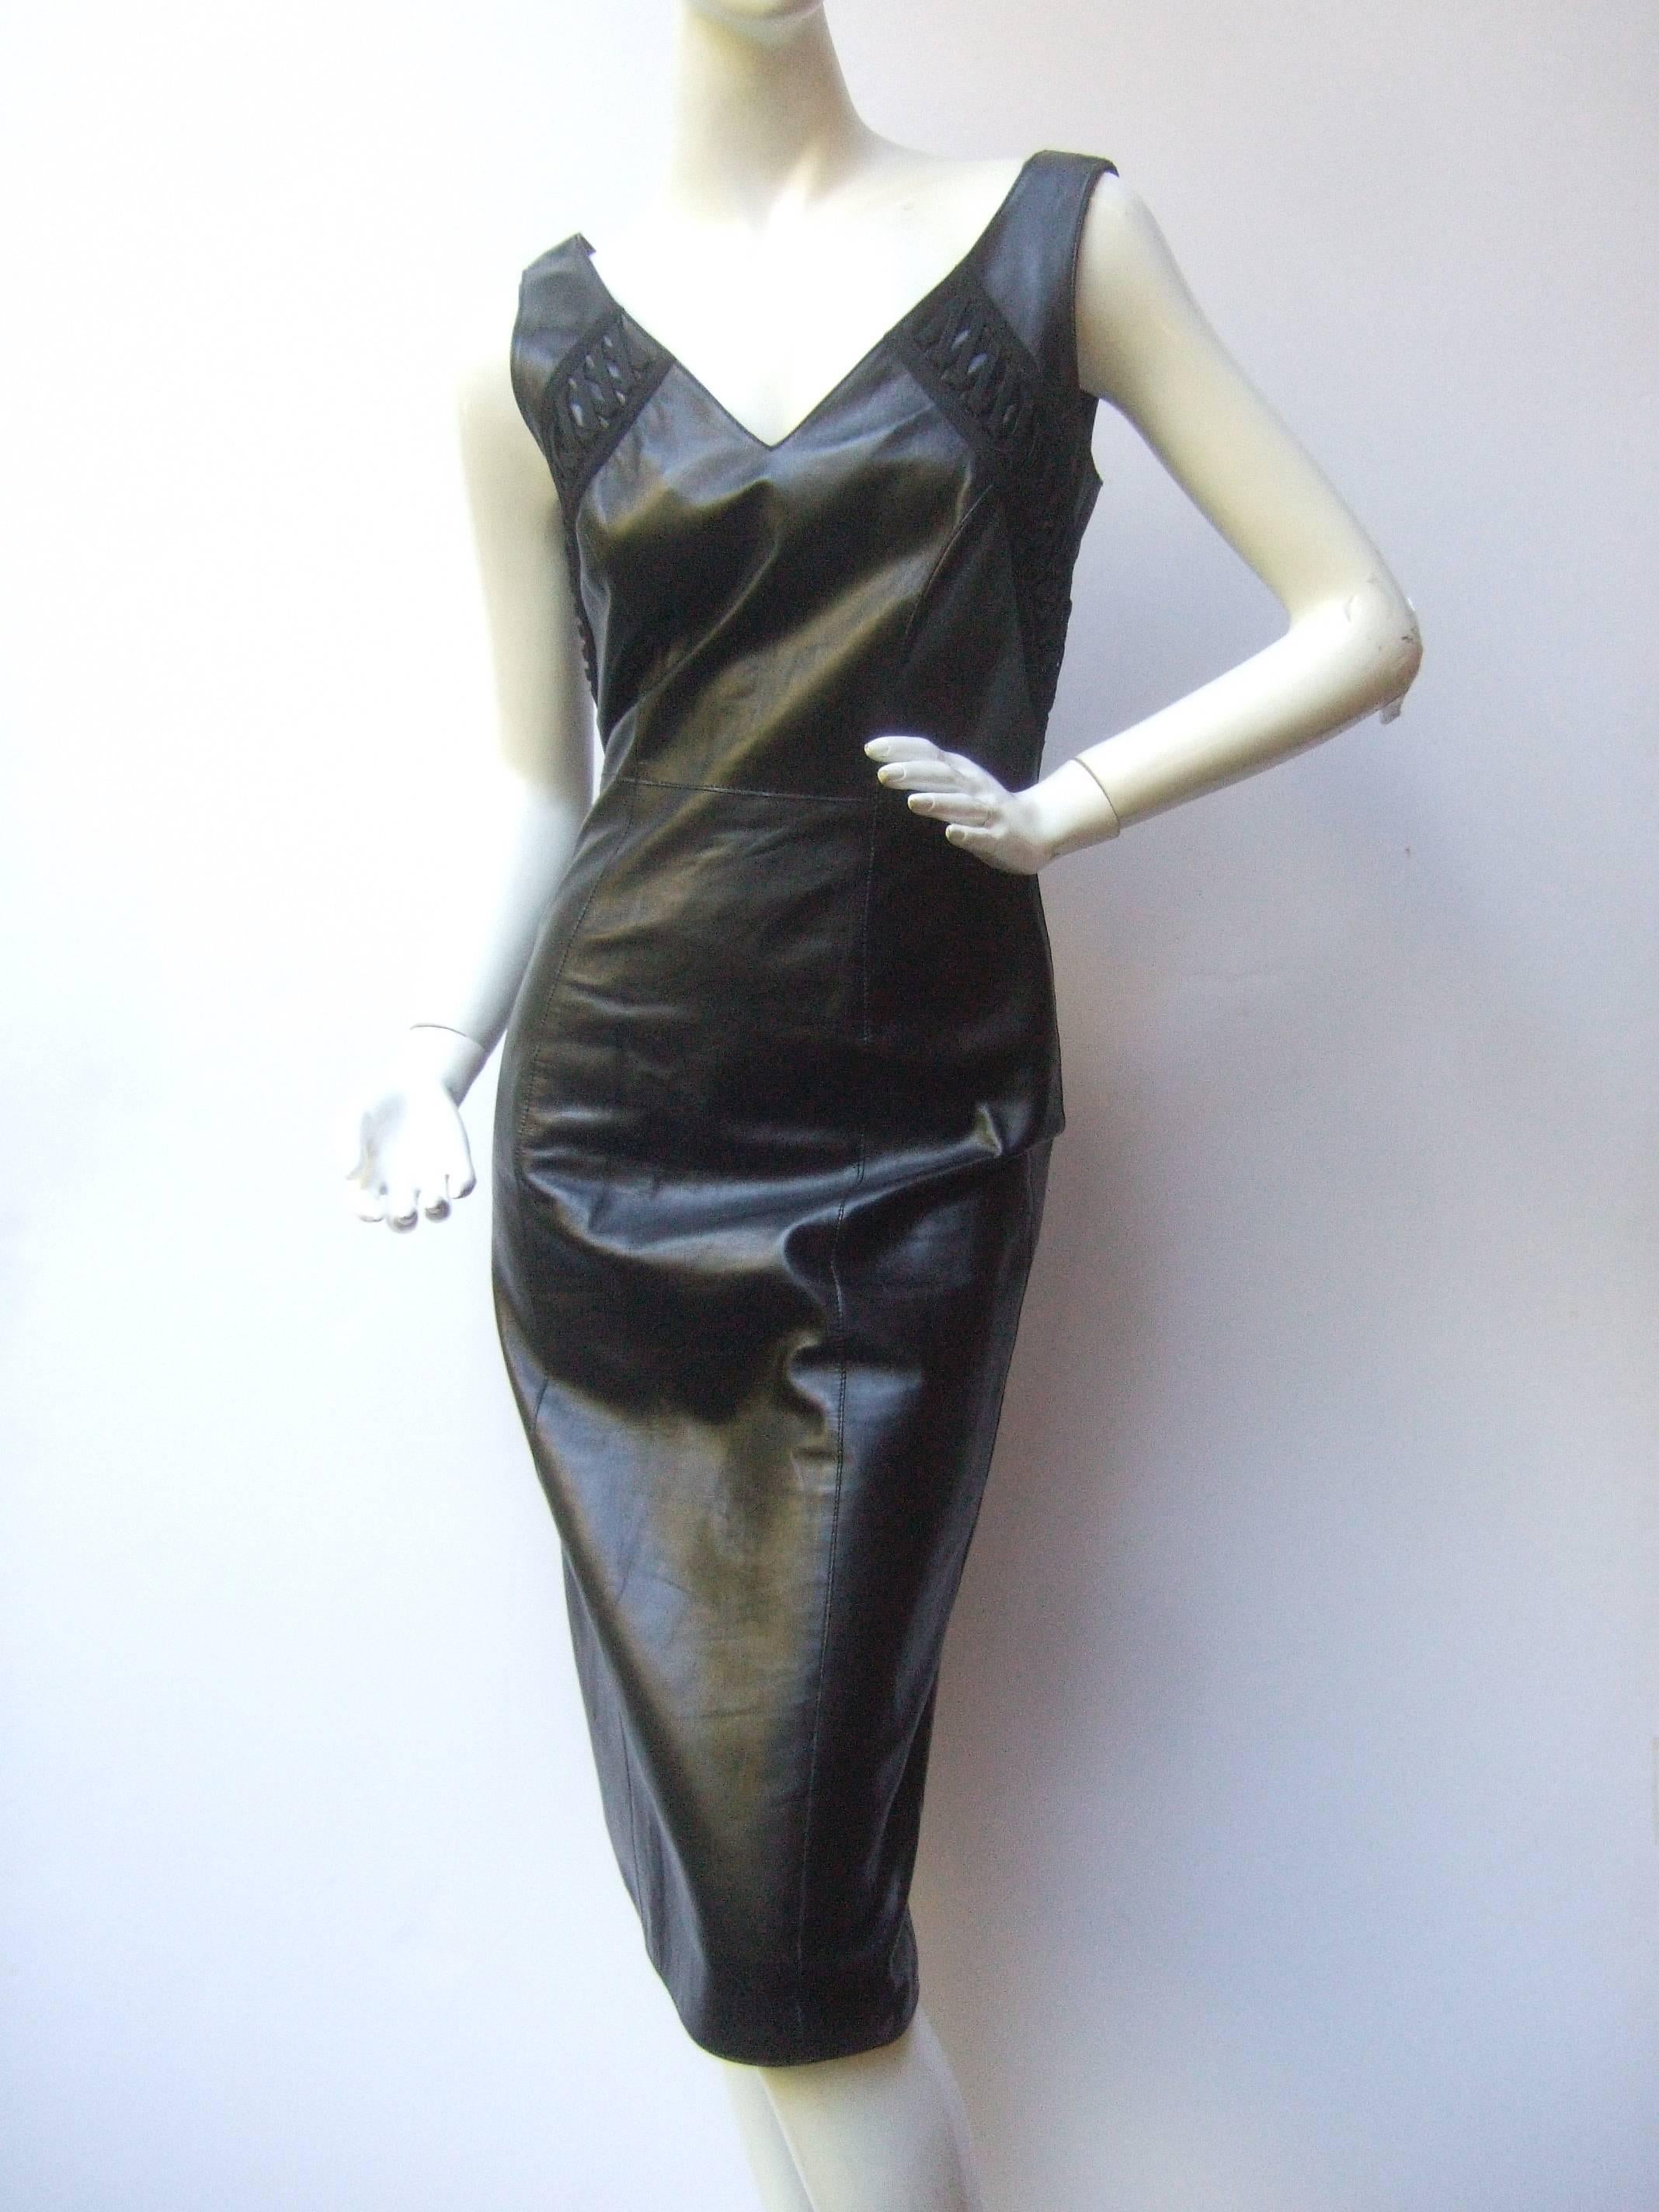 Christian Dior Paris Chic black leather bondage dress 
The stylish designer dress is constructed with supple
black leather with a slight sheen

The bodice and back side are accented with black
cloth crisscross lacing detail. The lacing detail